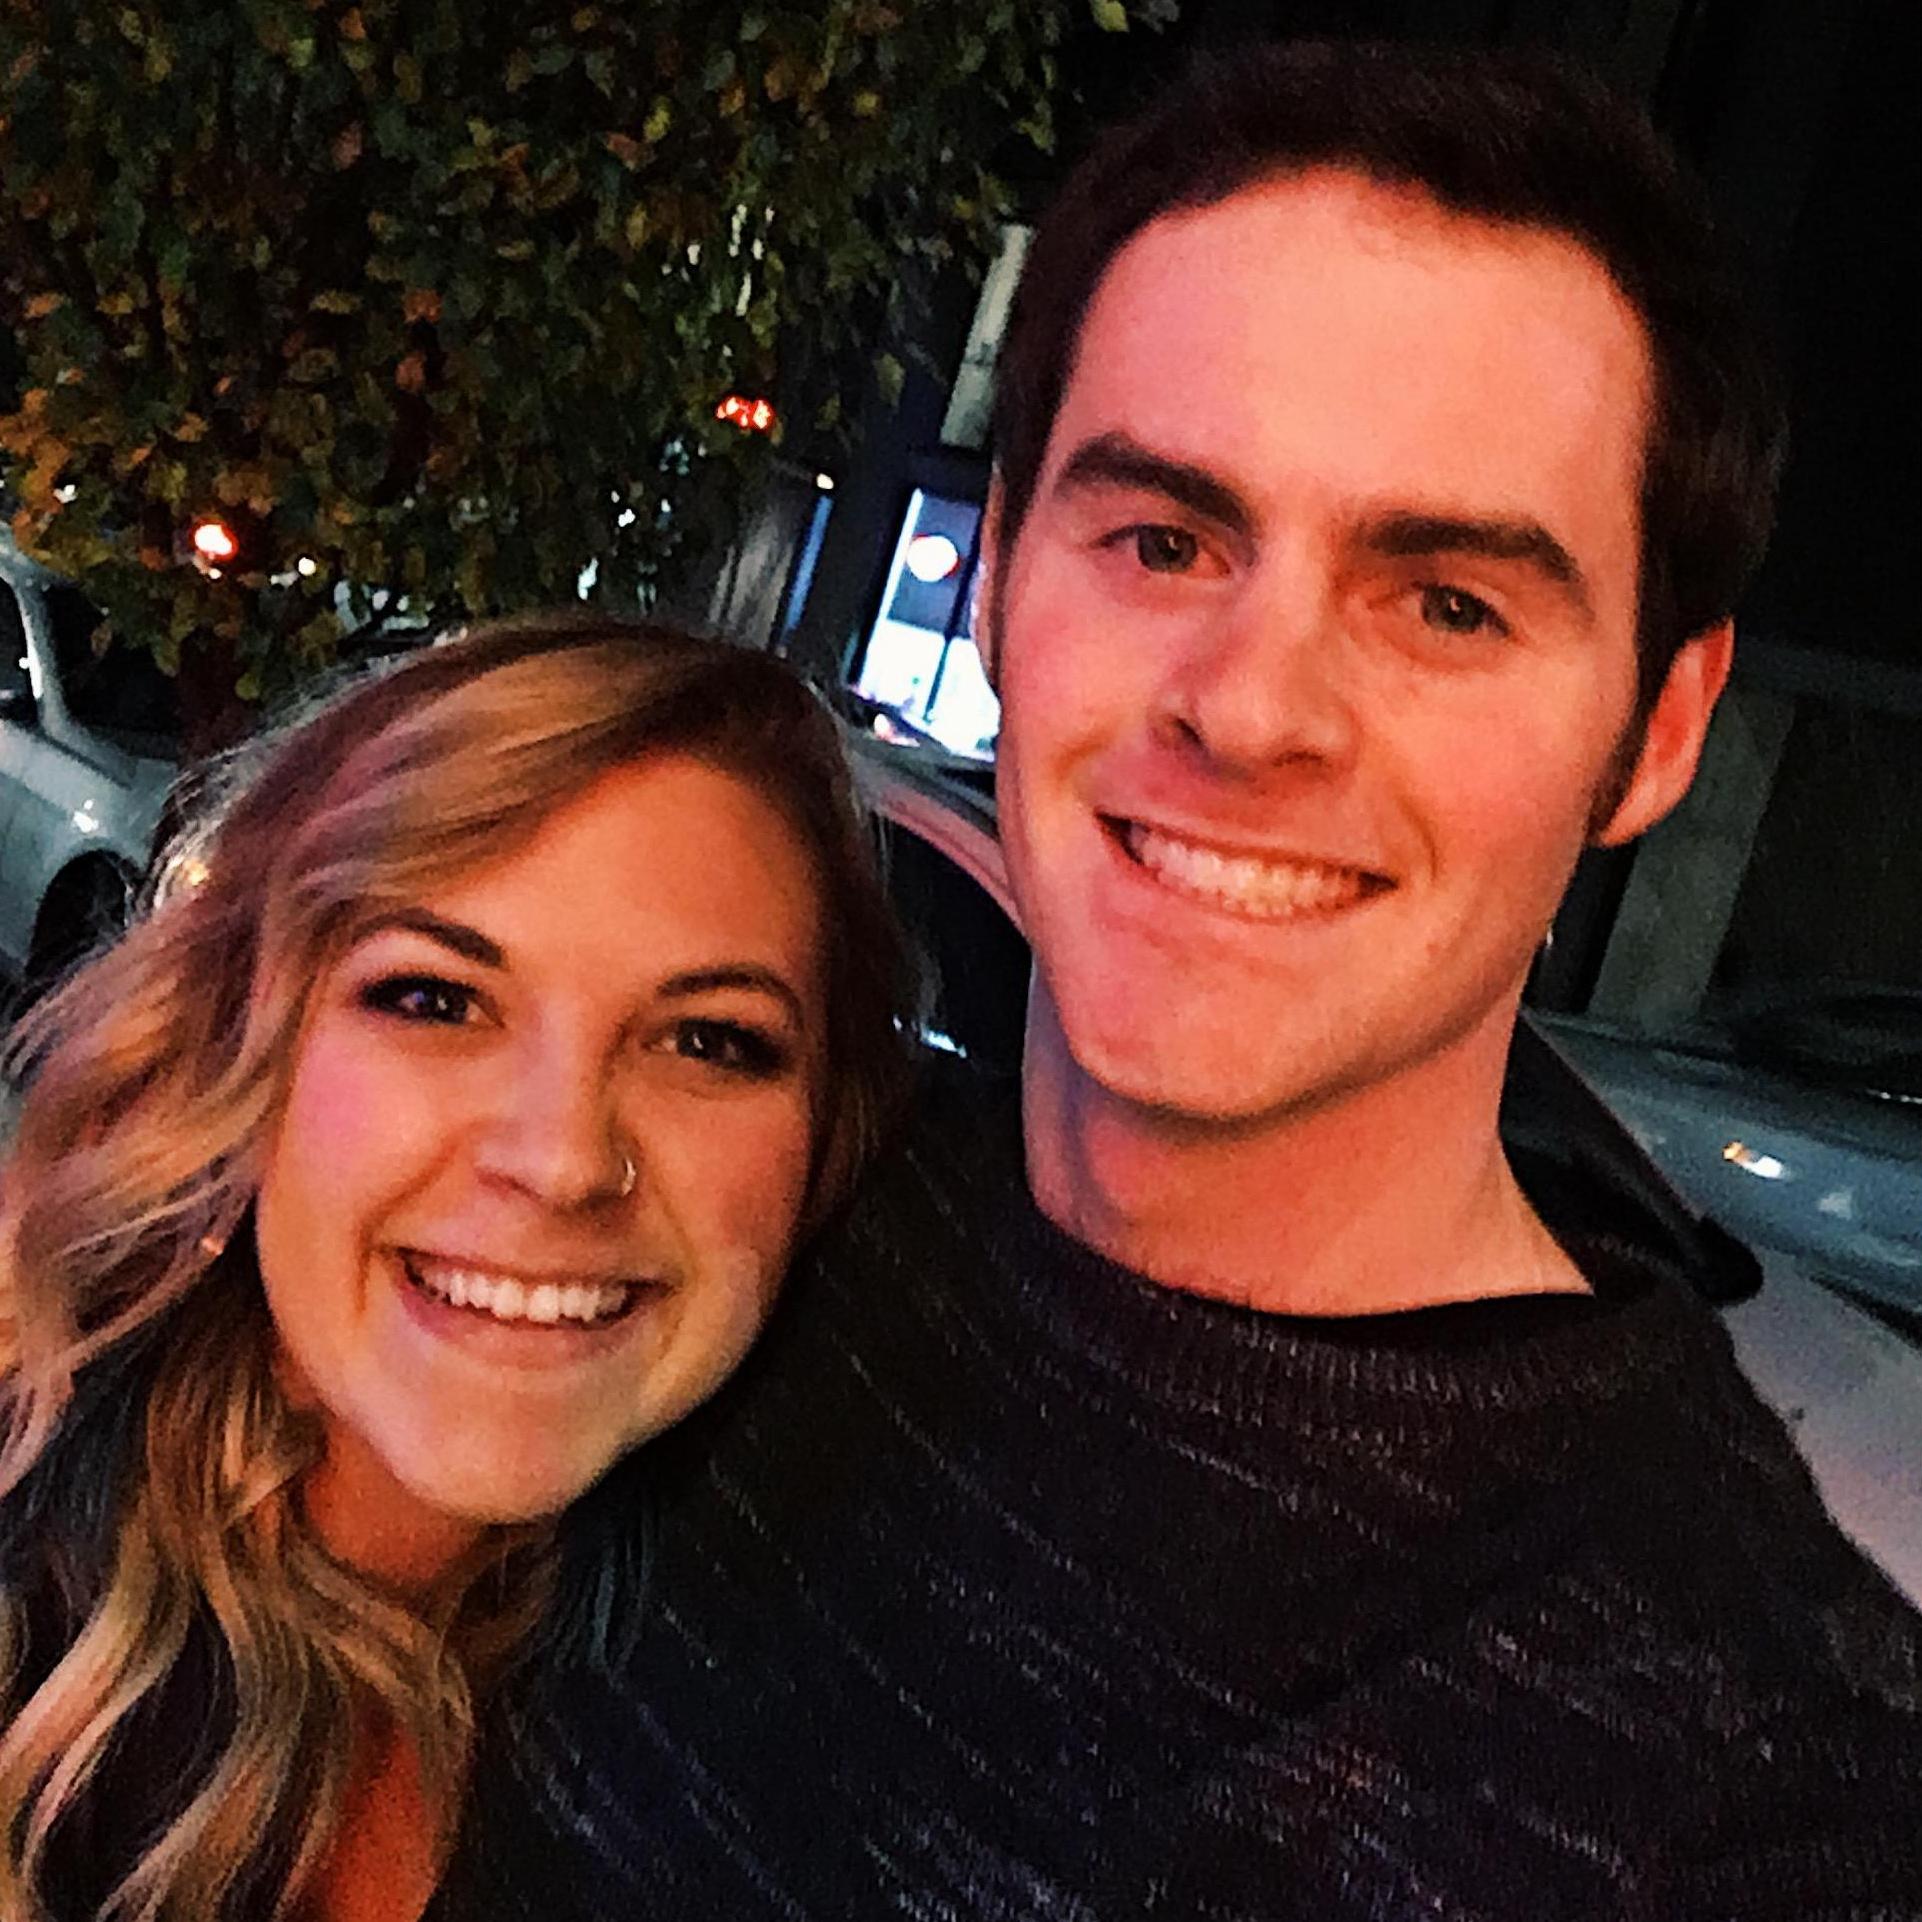 Salt and Straw Date just a couple weeks after Joey and Kelsea started dating.